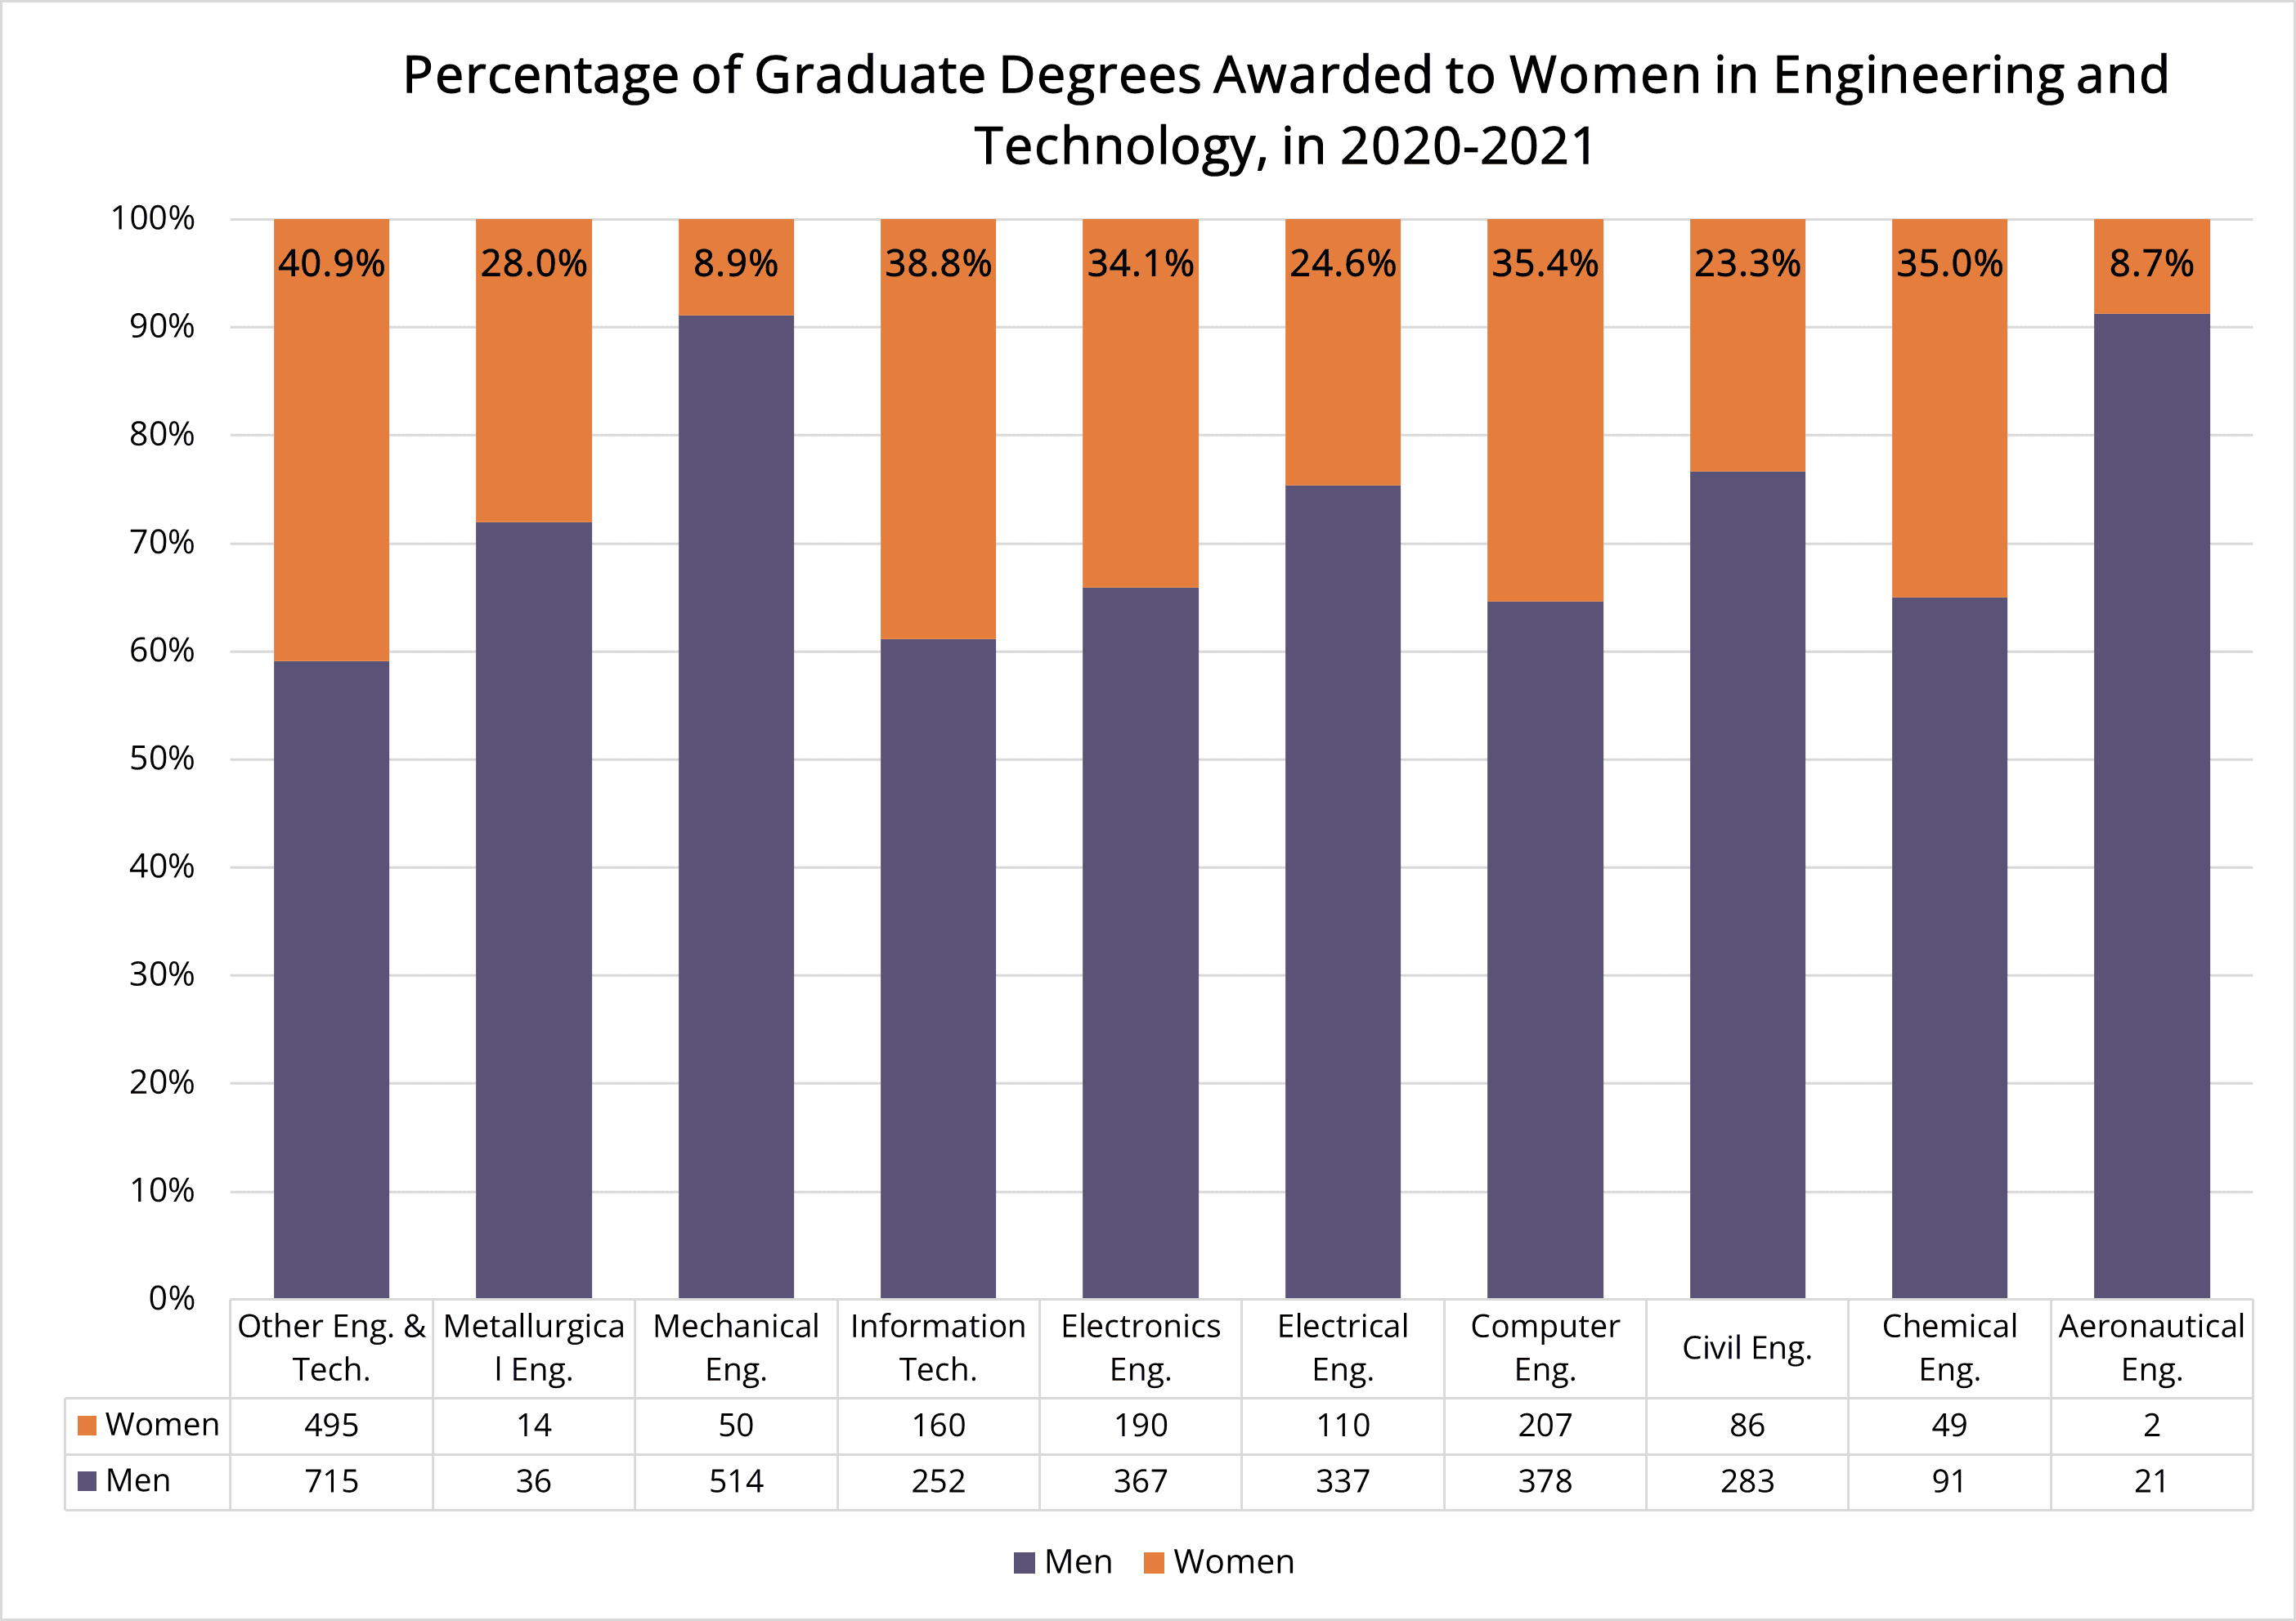 Bar graph representing the percentage of doctoral degrees awarded to women in engineering and technology.